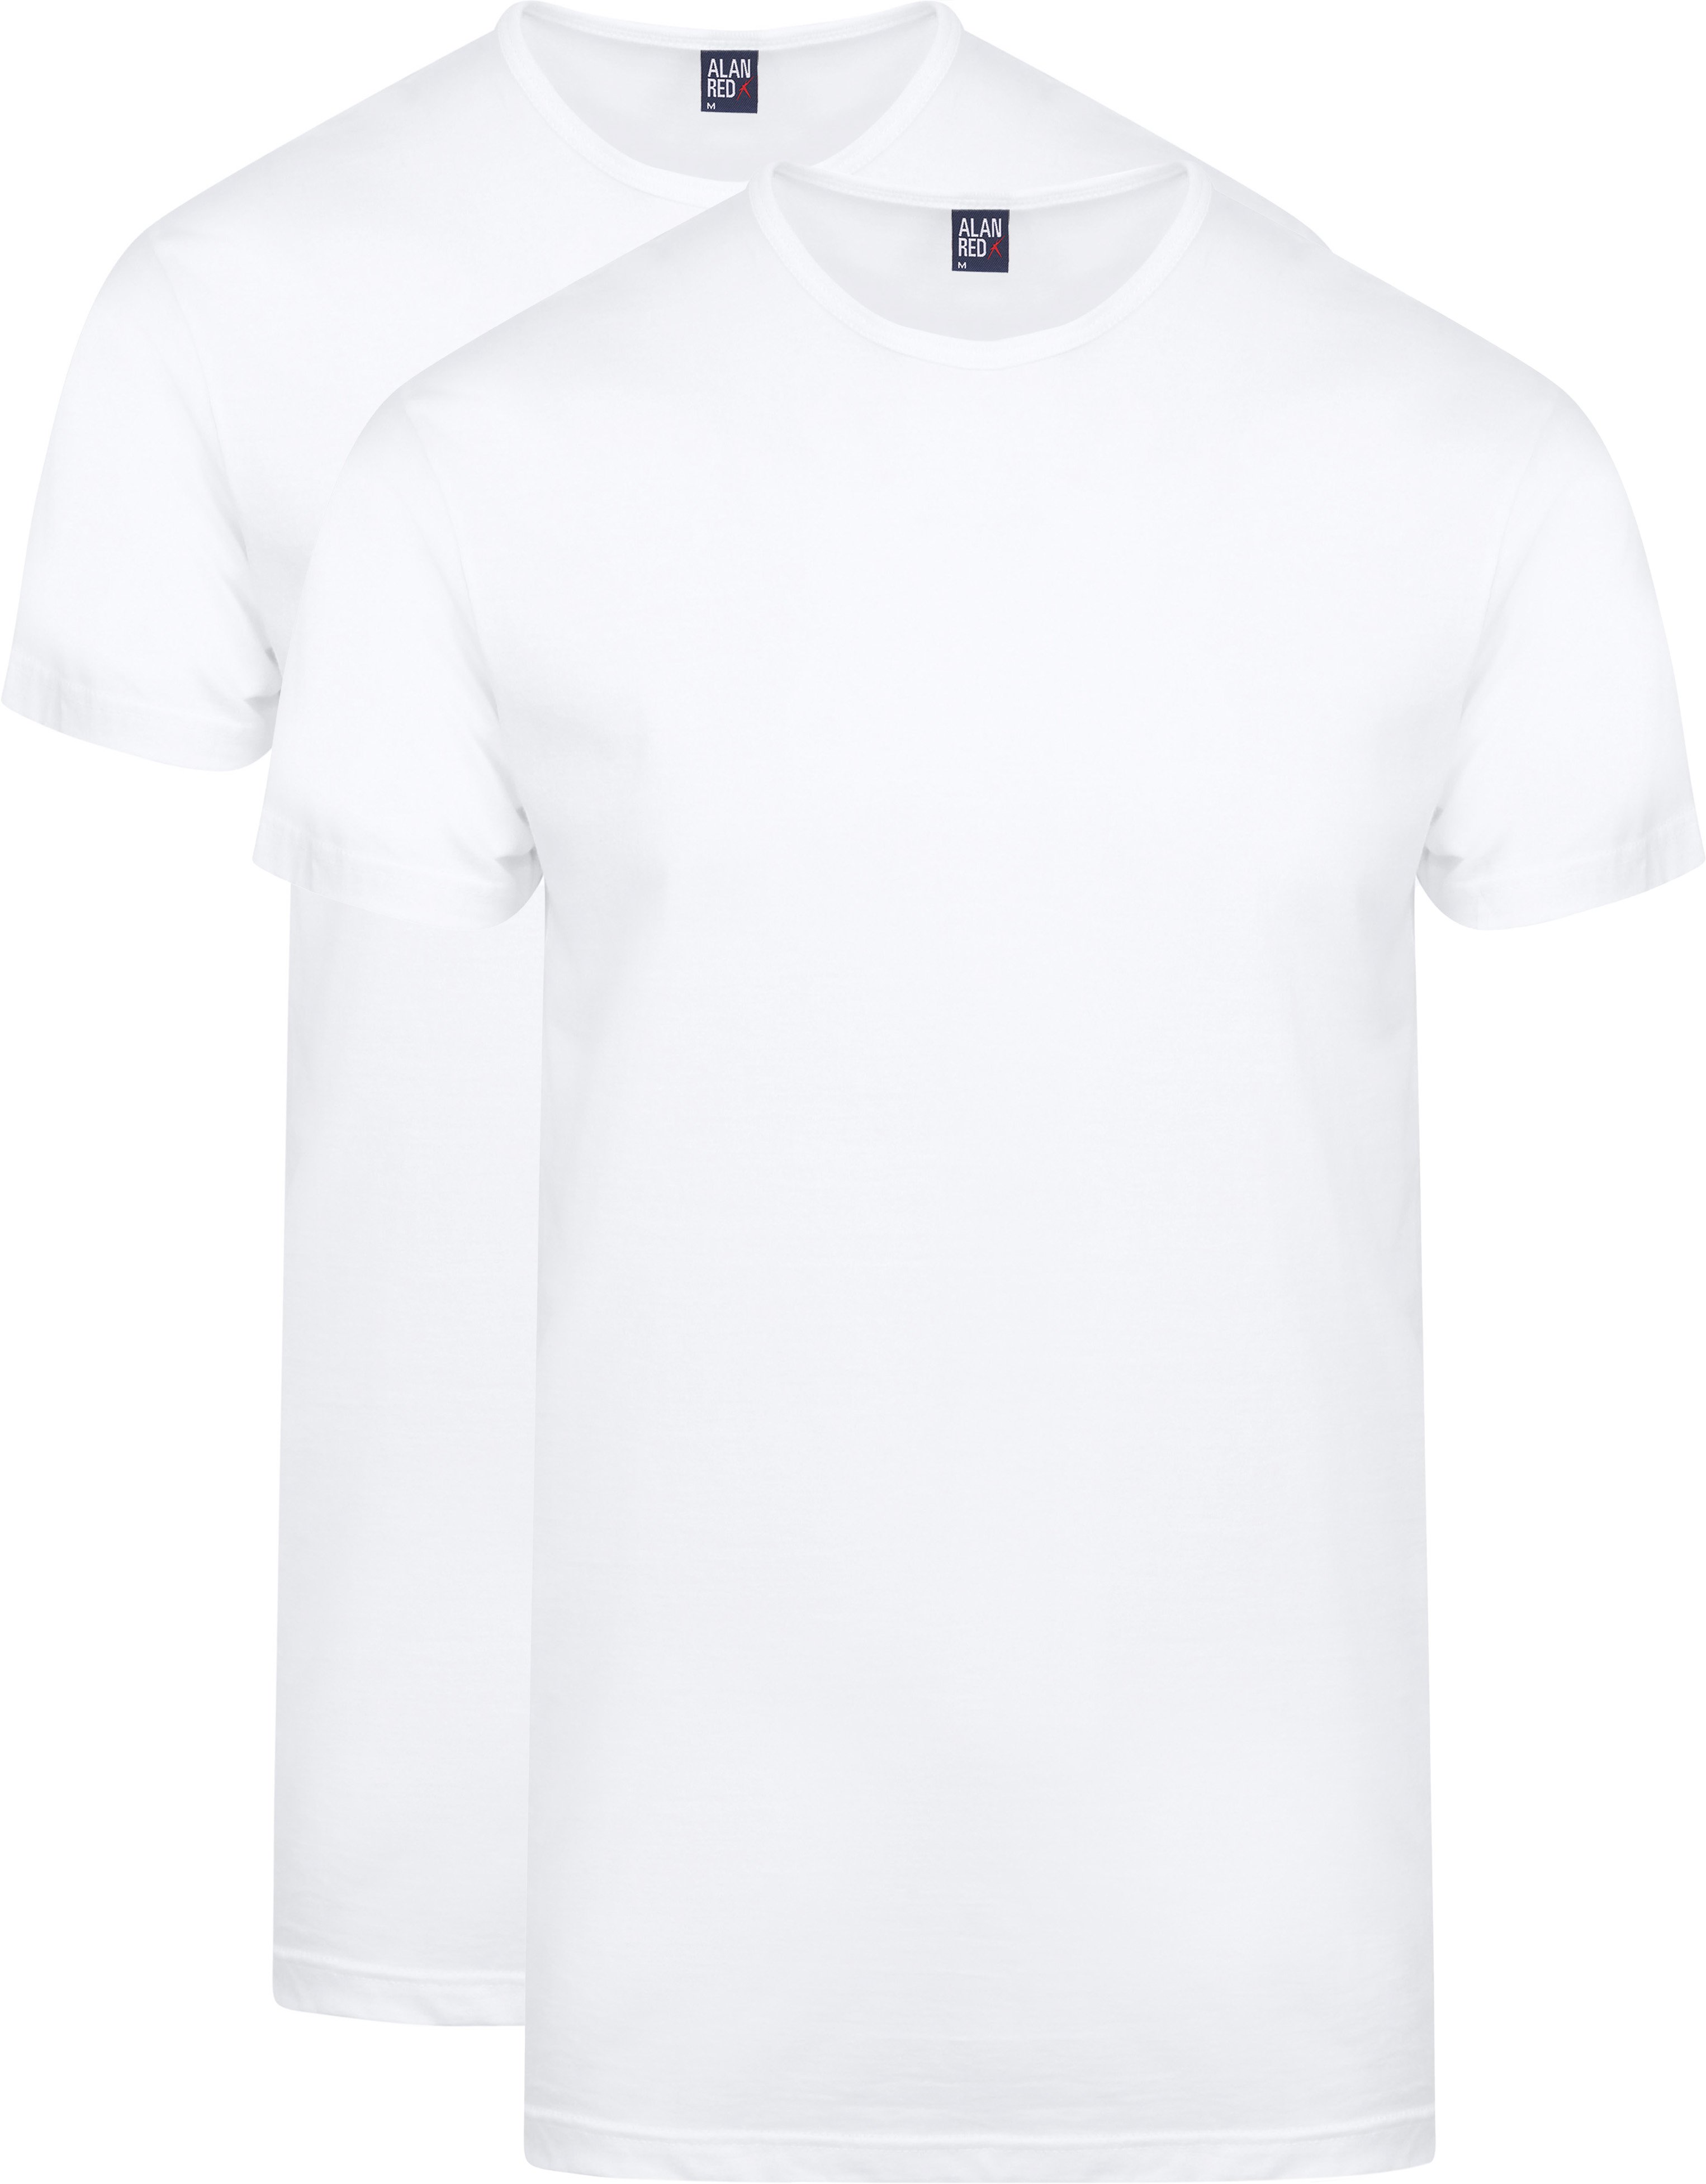 Derby Extra Lange T-shirts Wit (2Pack)